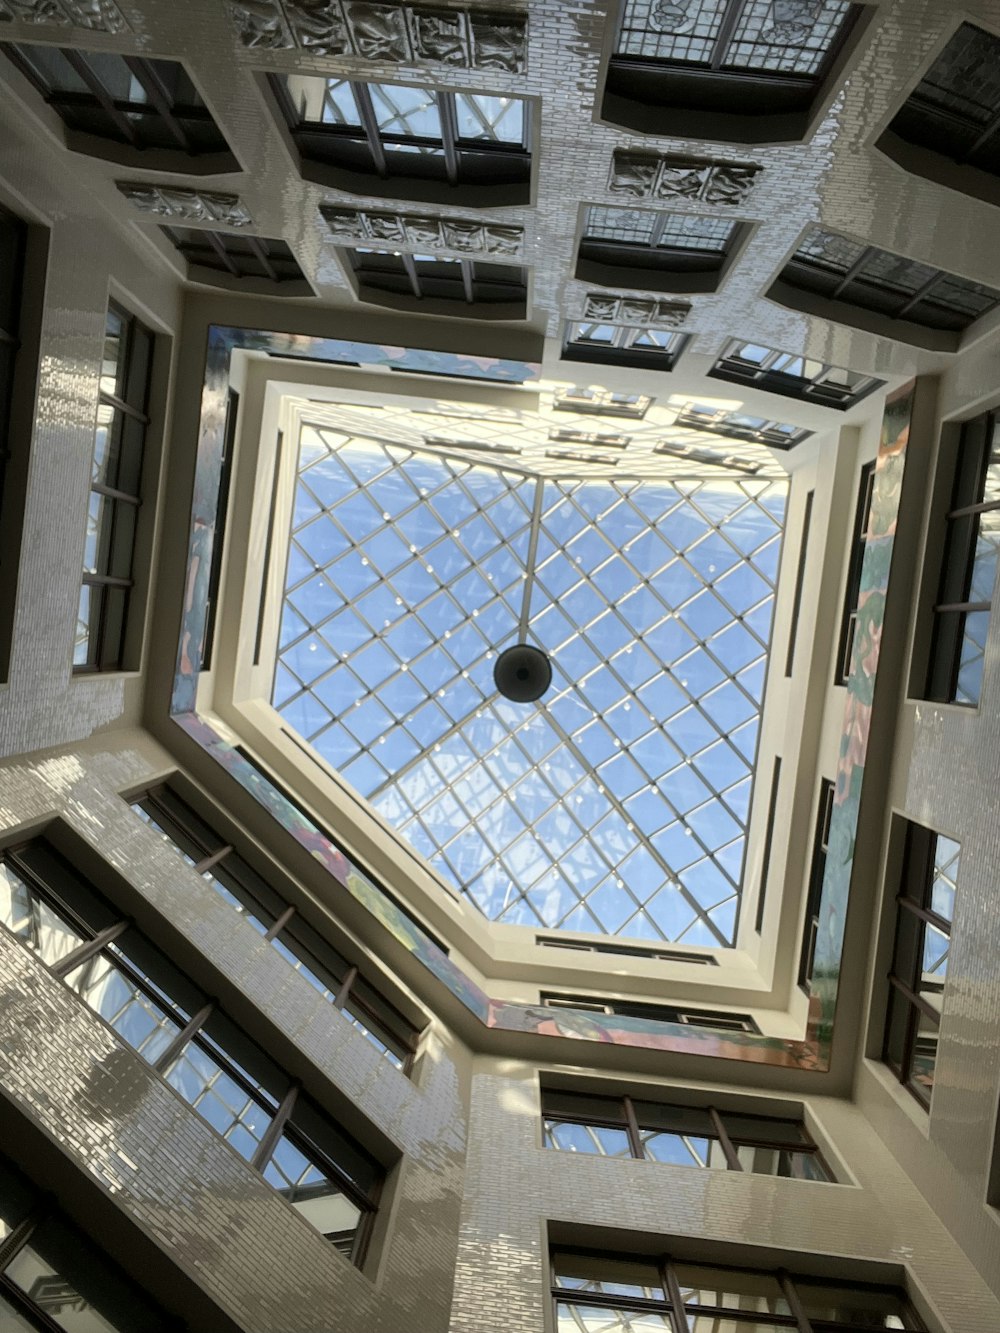 looking up at the ceiling of a building